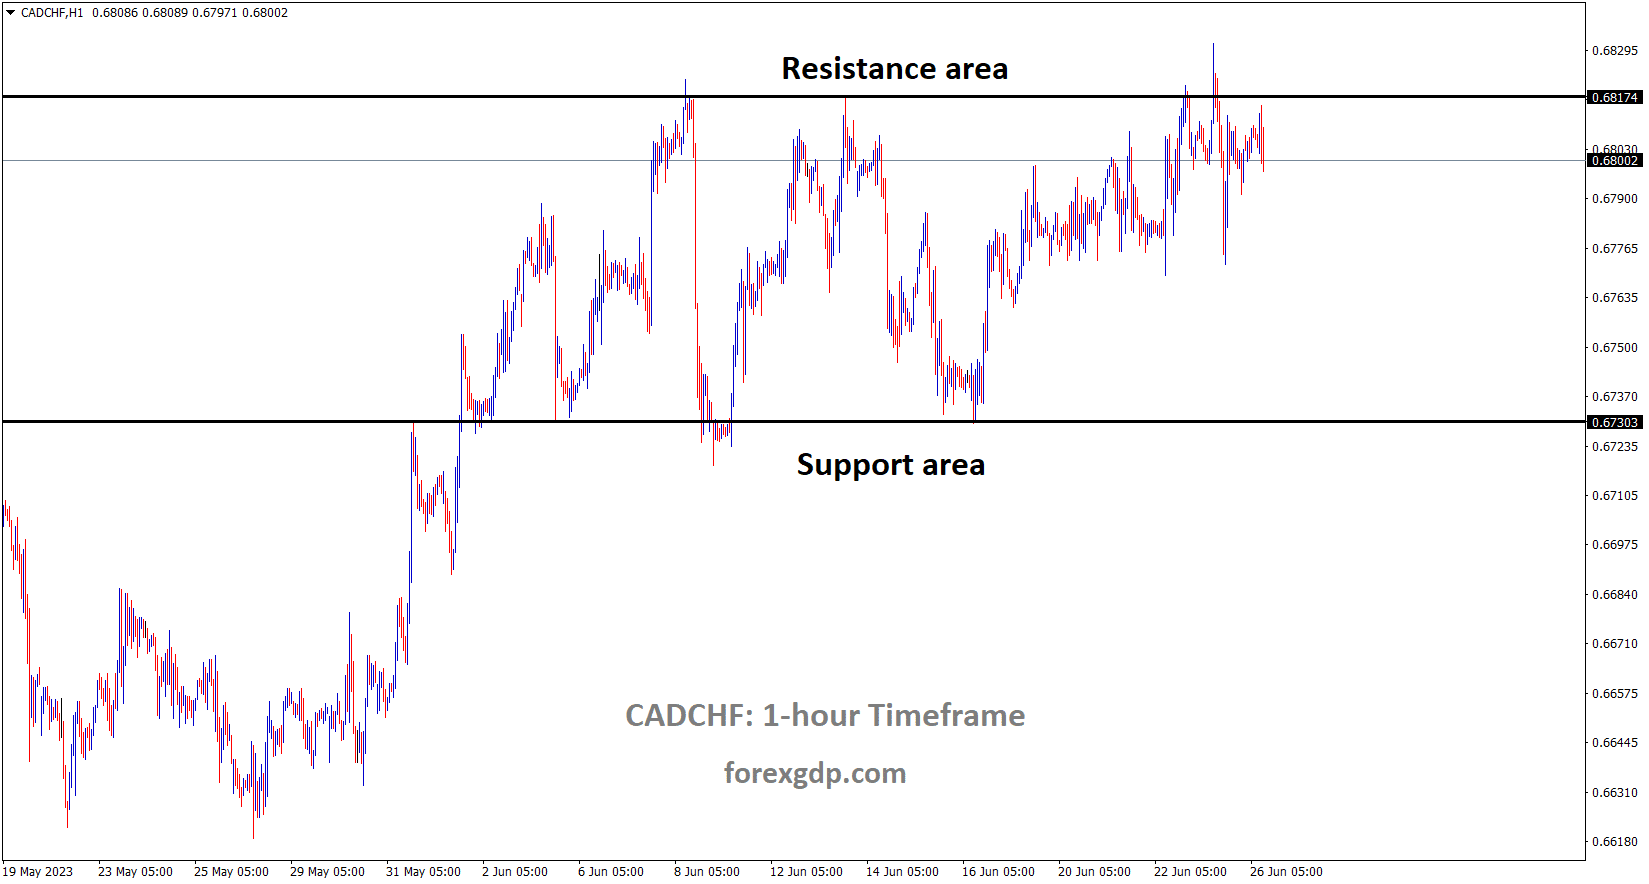 CADCHF is moving in the Descending channel and the market has reached the resistance area of the pattern